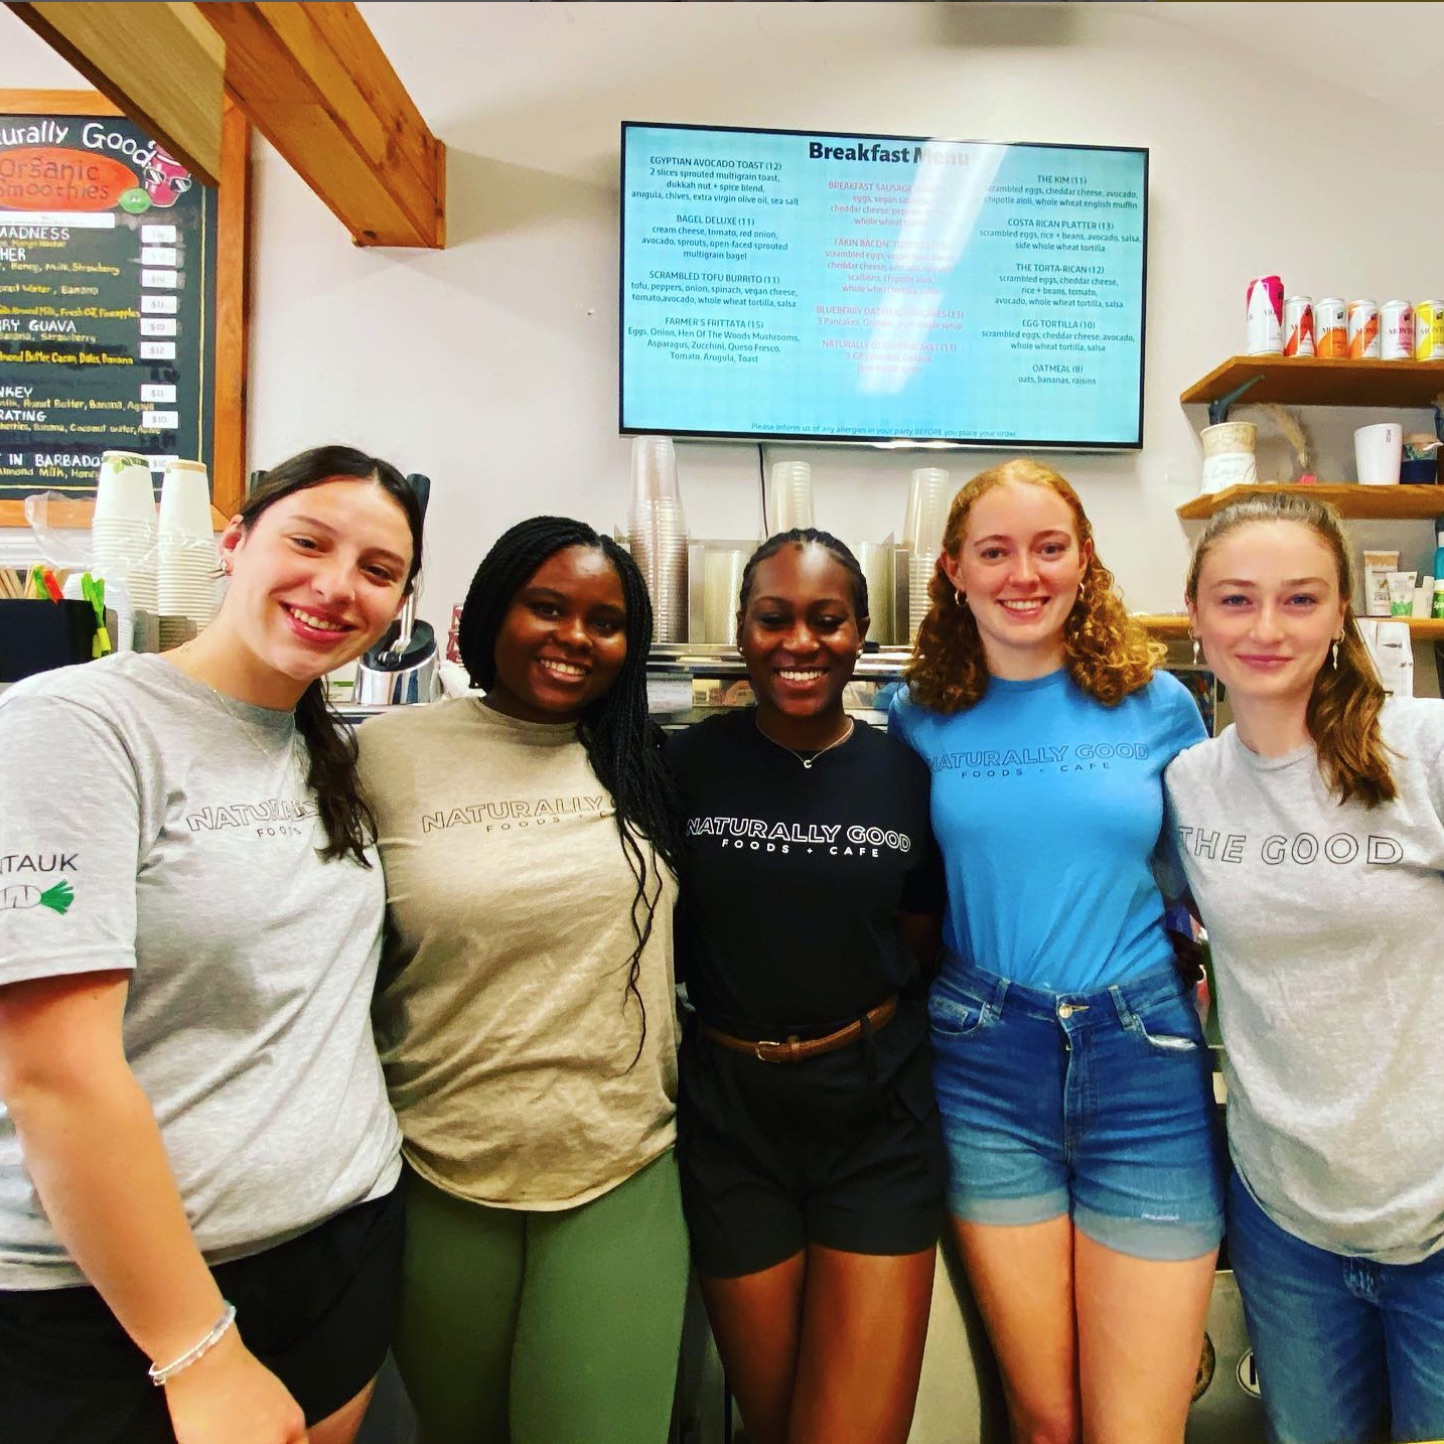 The happy staff at Naturally Good Foods + Cafe in Montauk